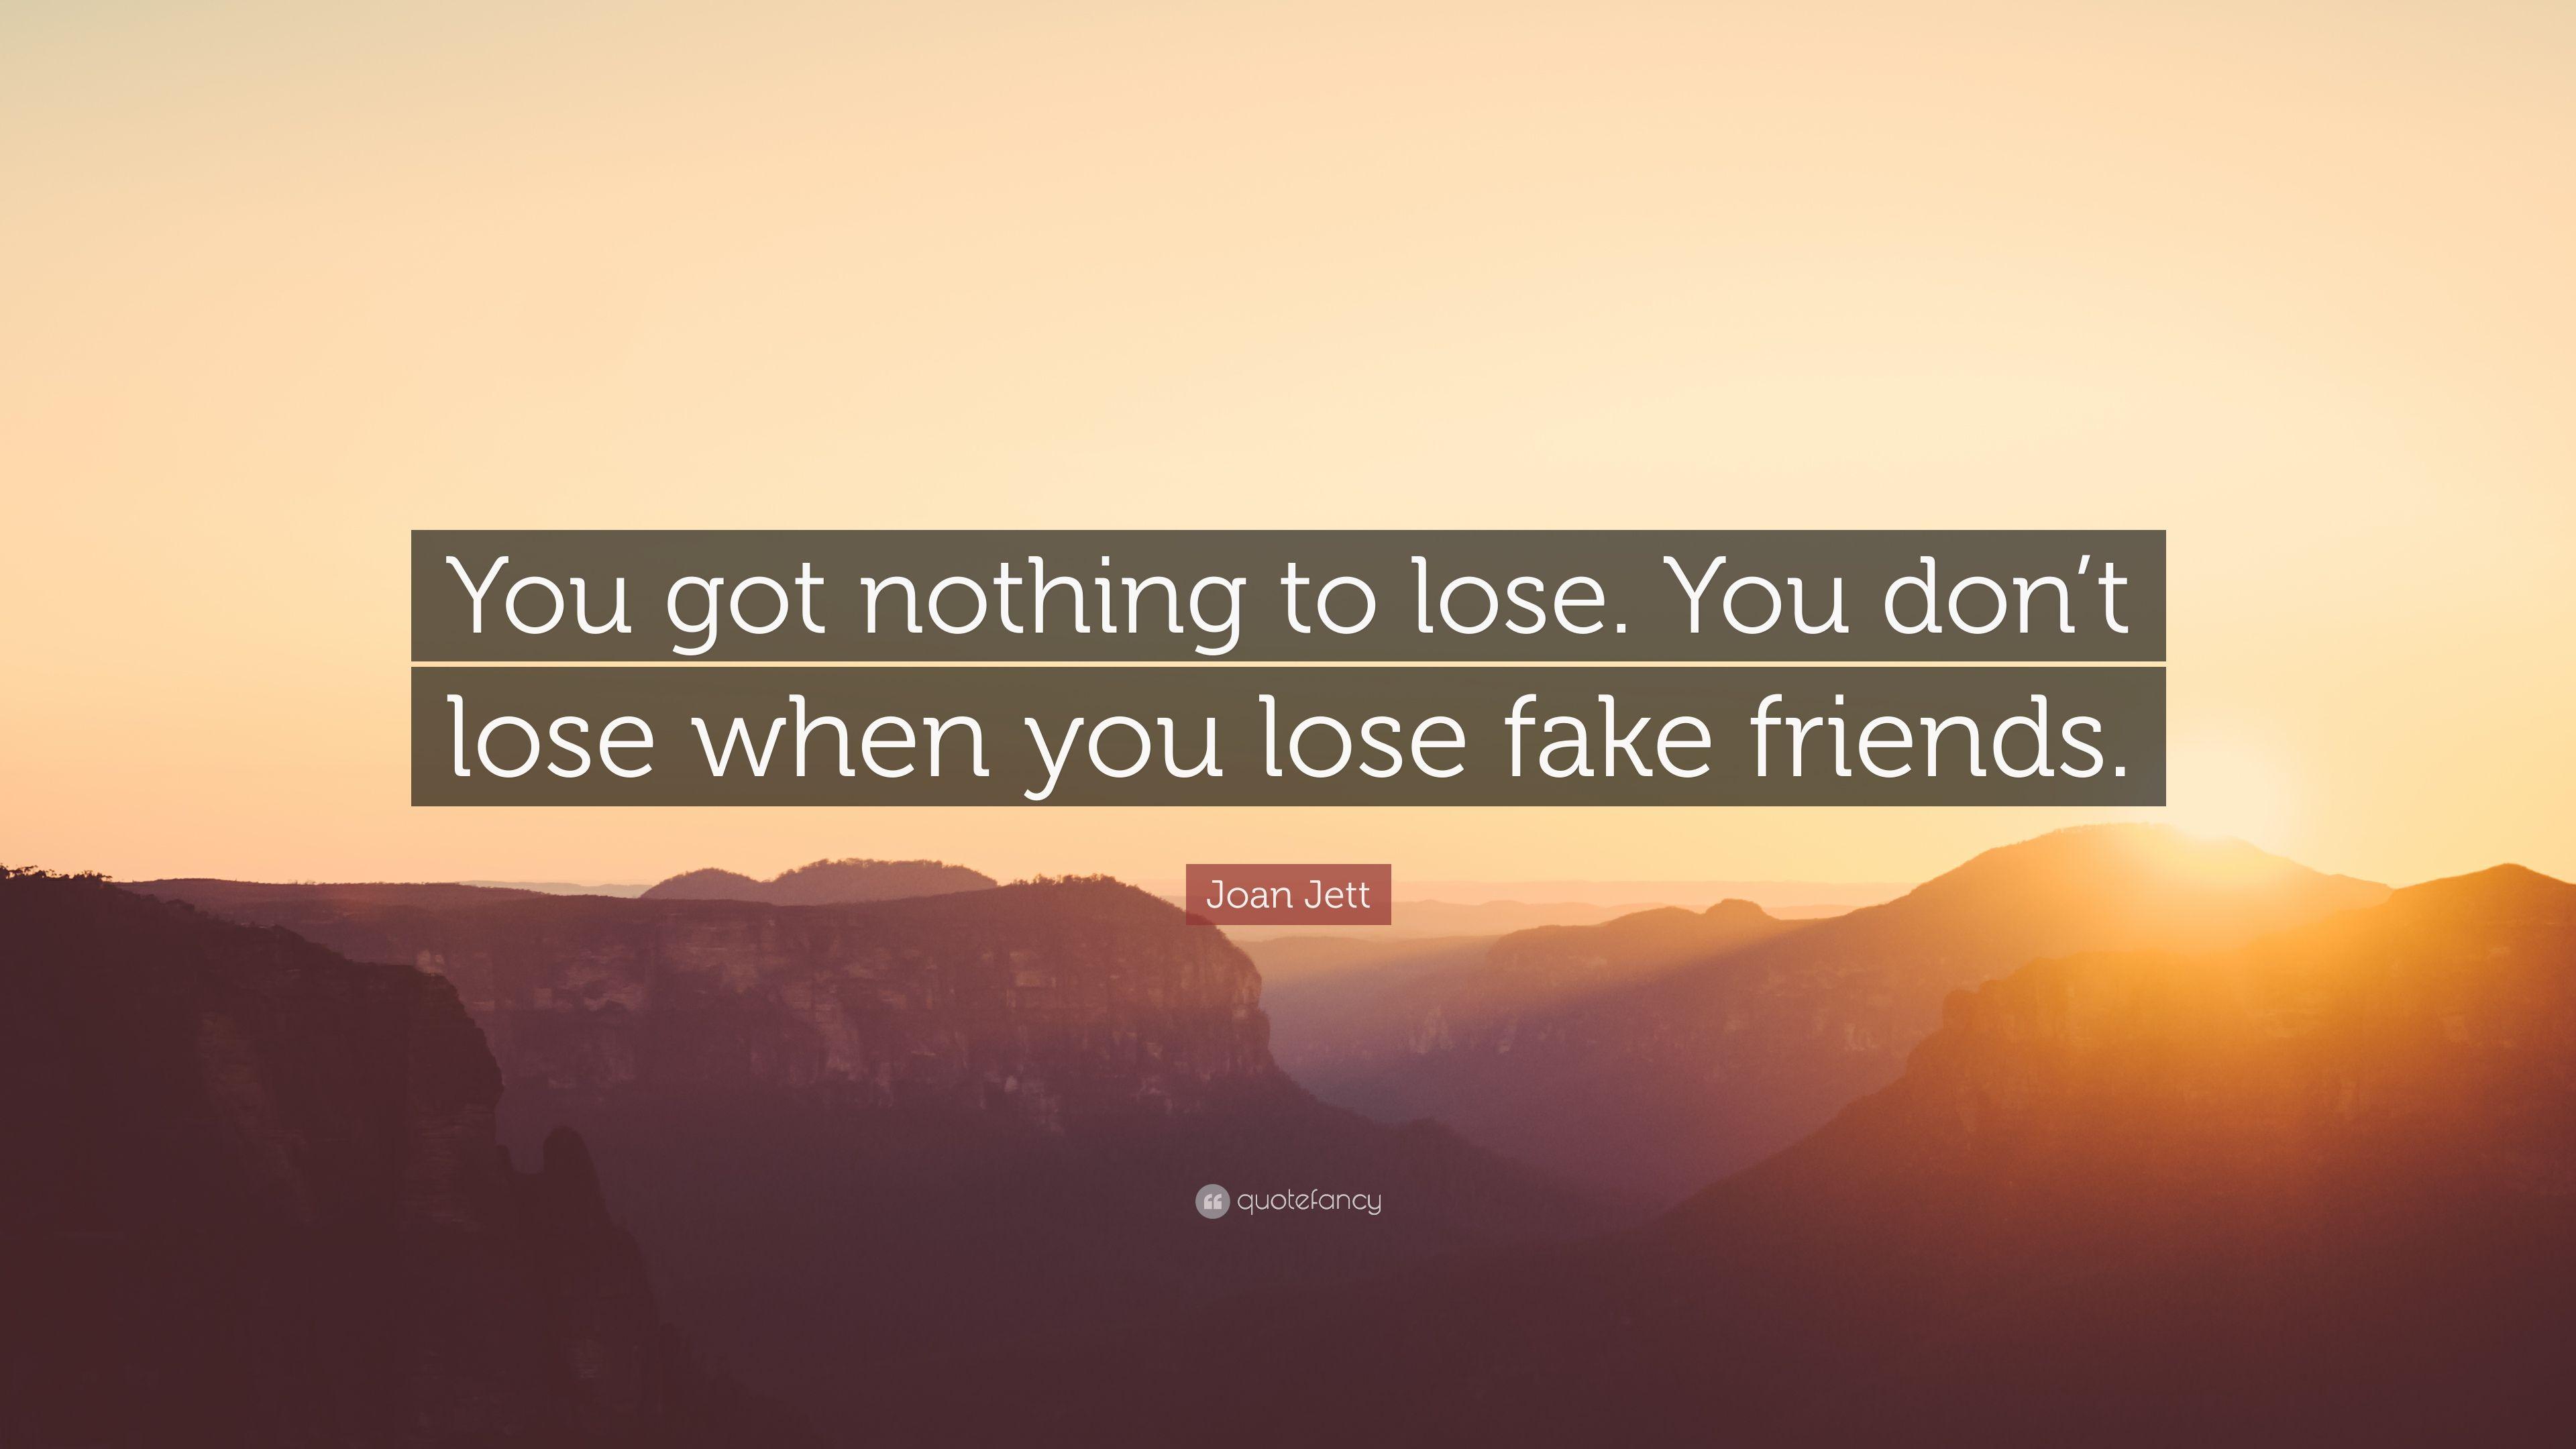 Joan Jett Quote: “You got nothing to lose. You don't lose when you